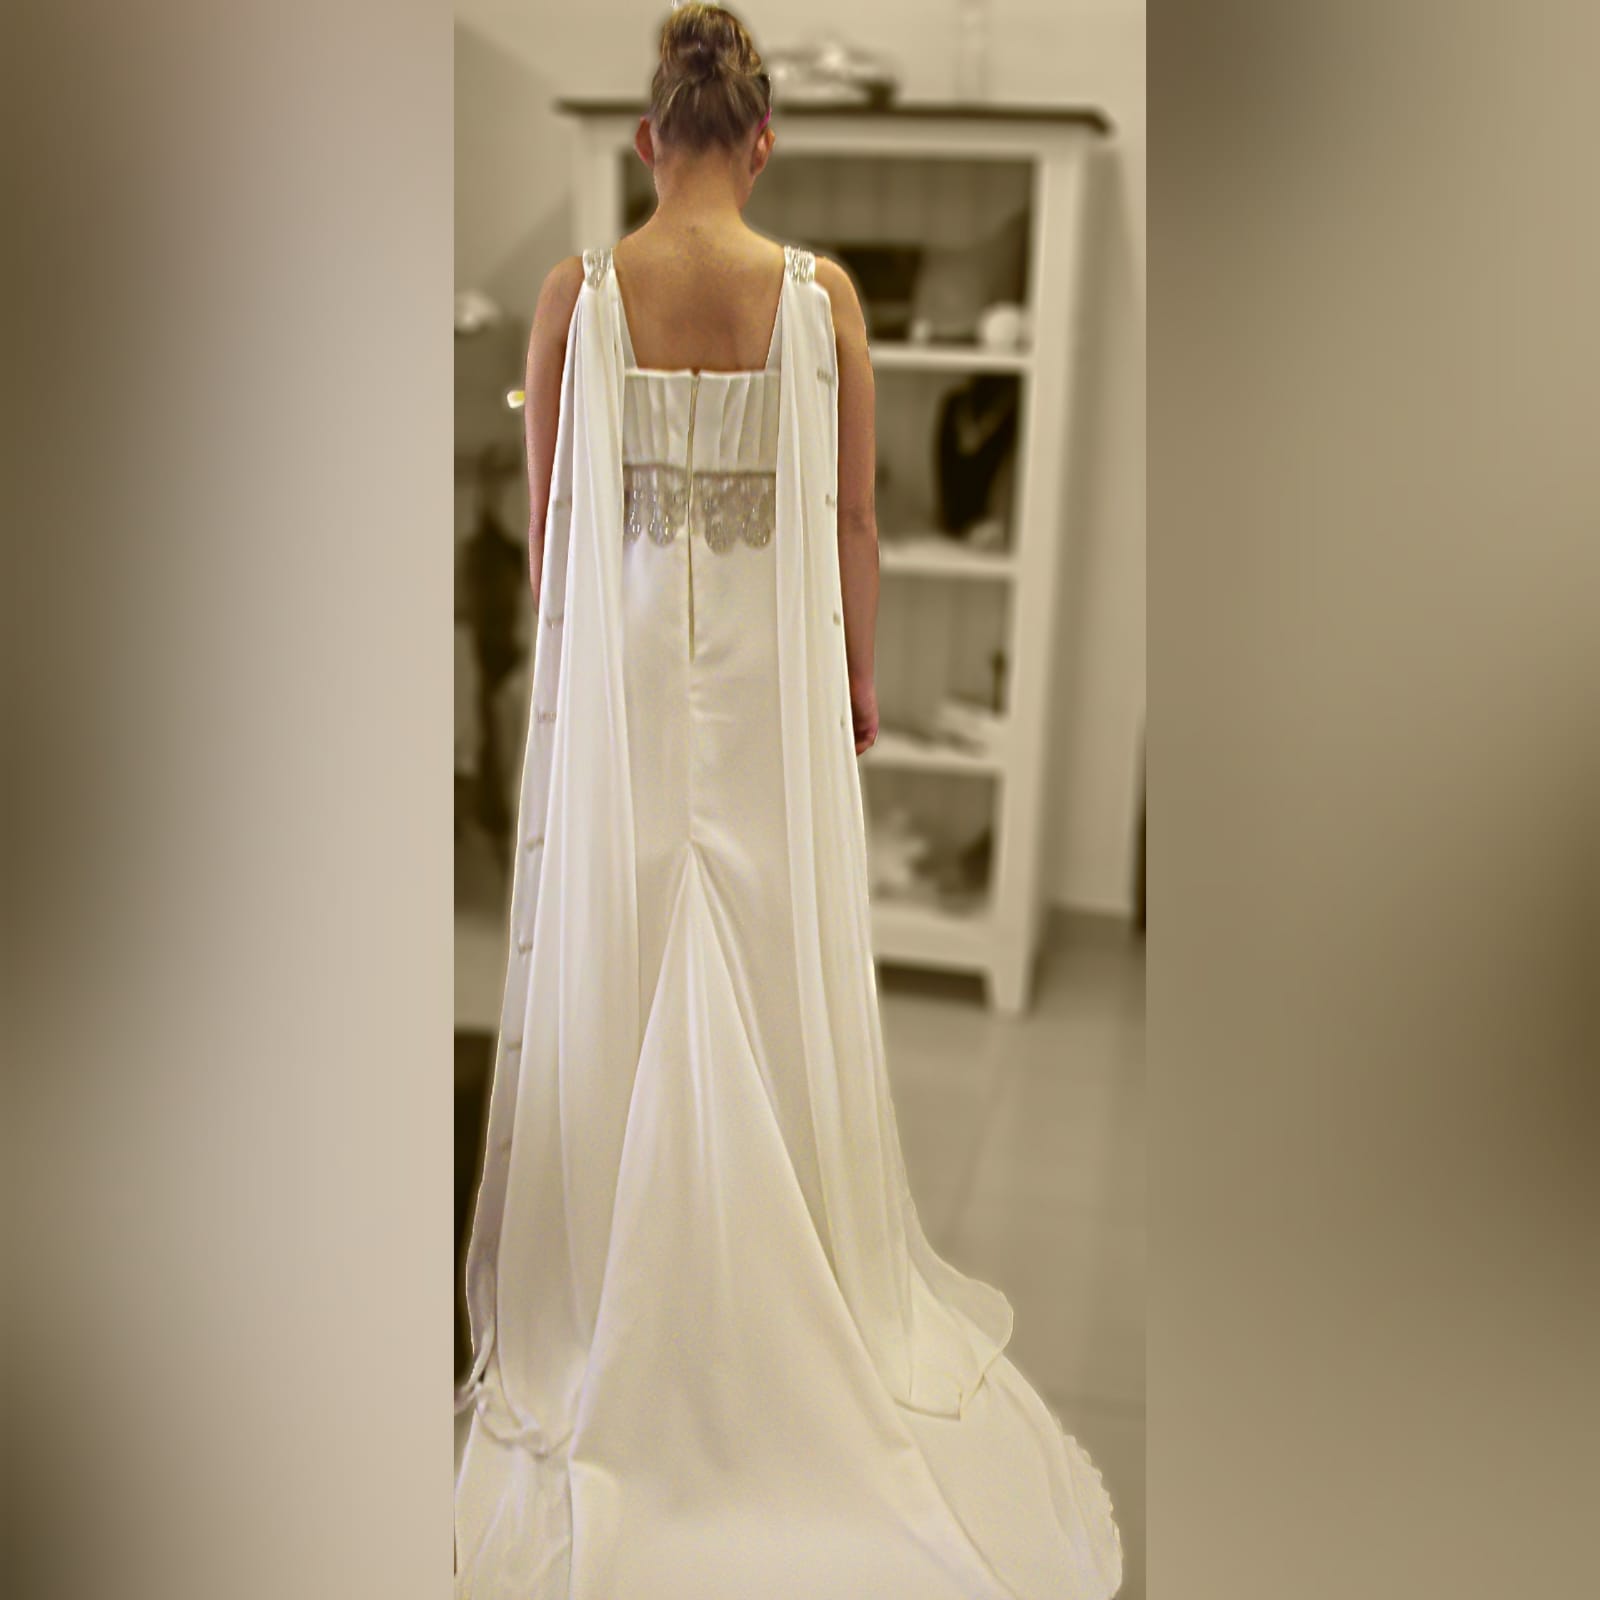 Ivory cross busted wedding dress with train 4 ivory cross busted wedding dress with an added back panel creating a train. Two long shoulder chiffon pieces decorated with bronze embroidery detail and under bust finish this wedding dress off.